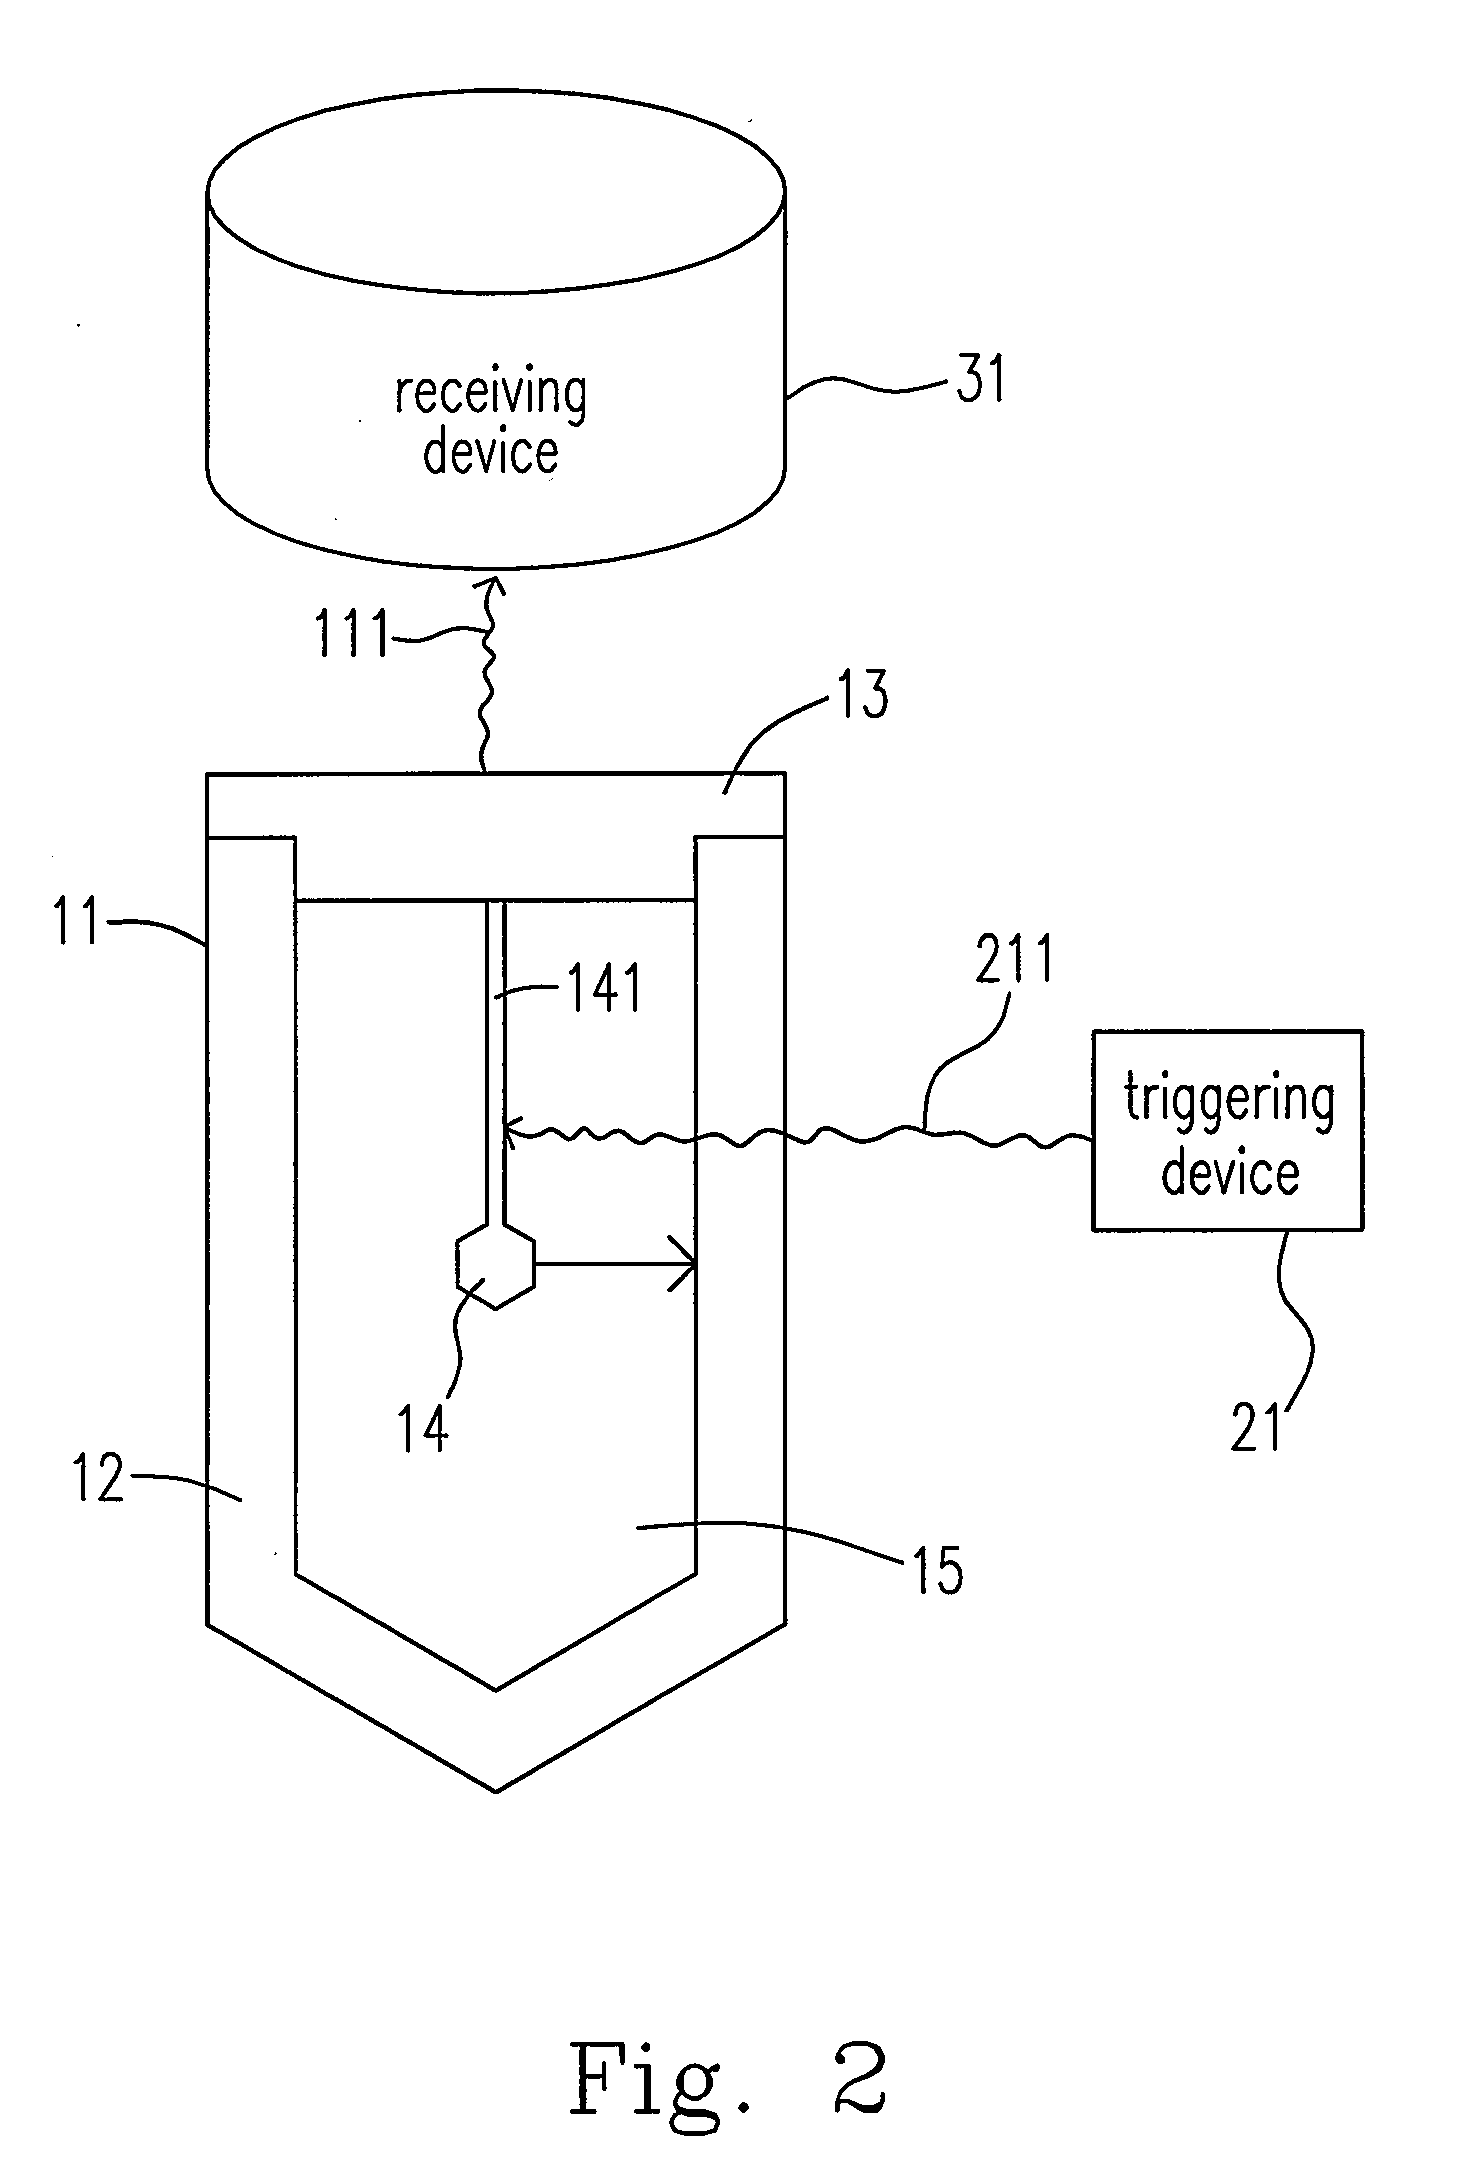 Non-contact apparatus and method for stability assessment of dental implant